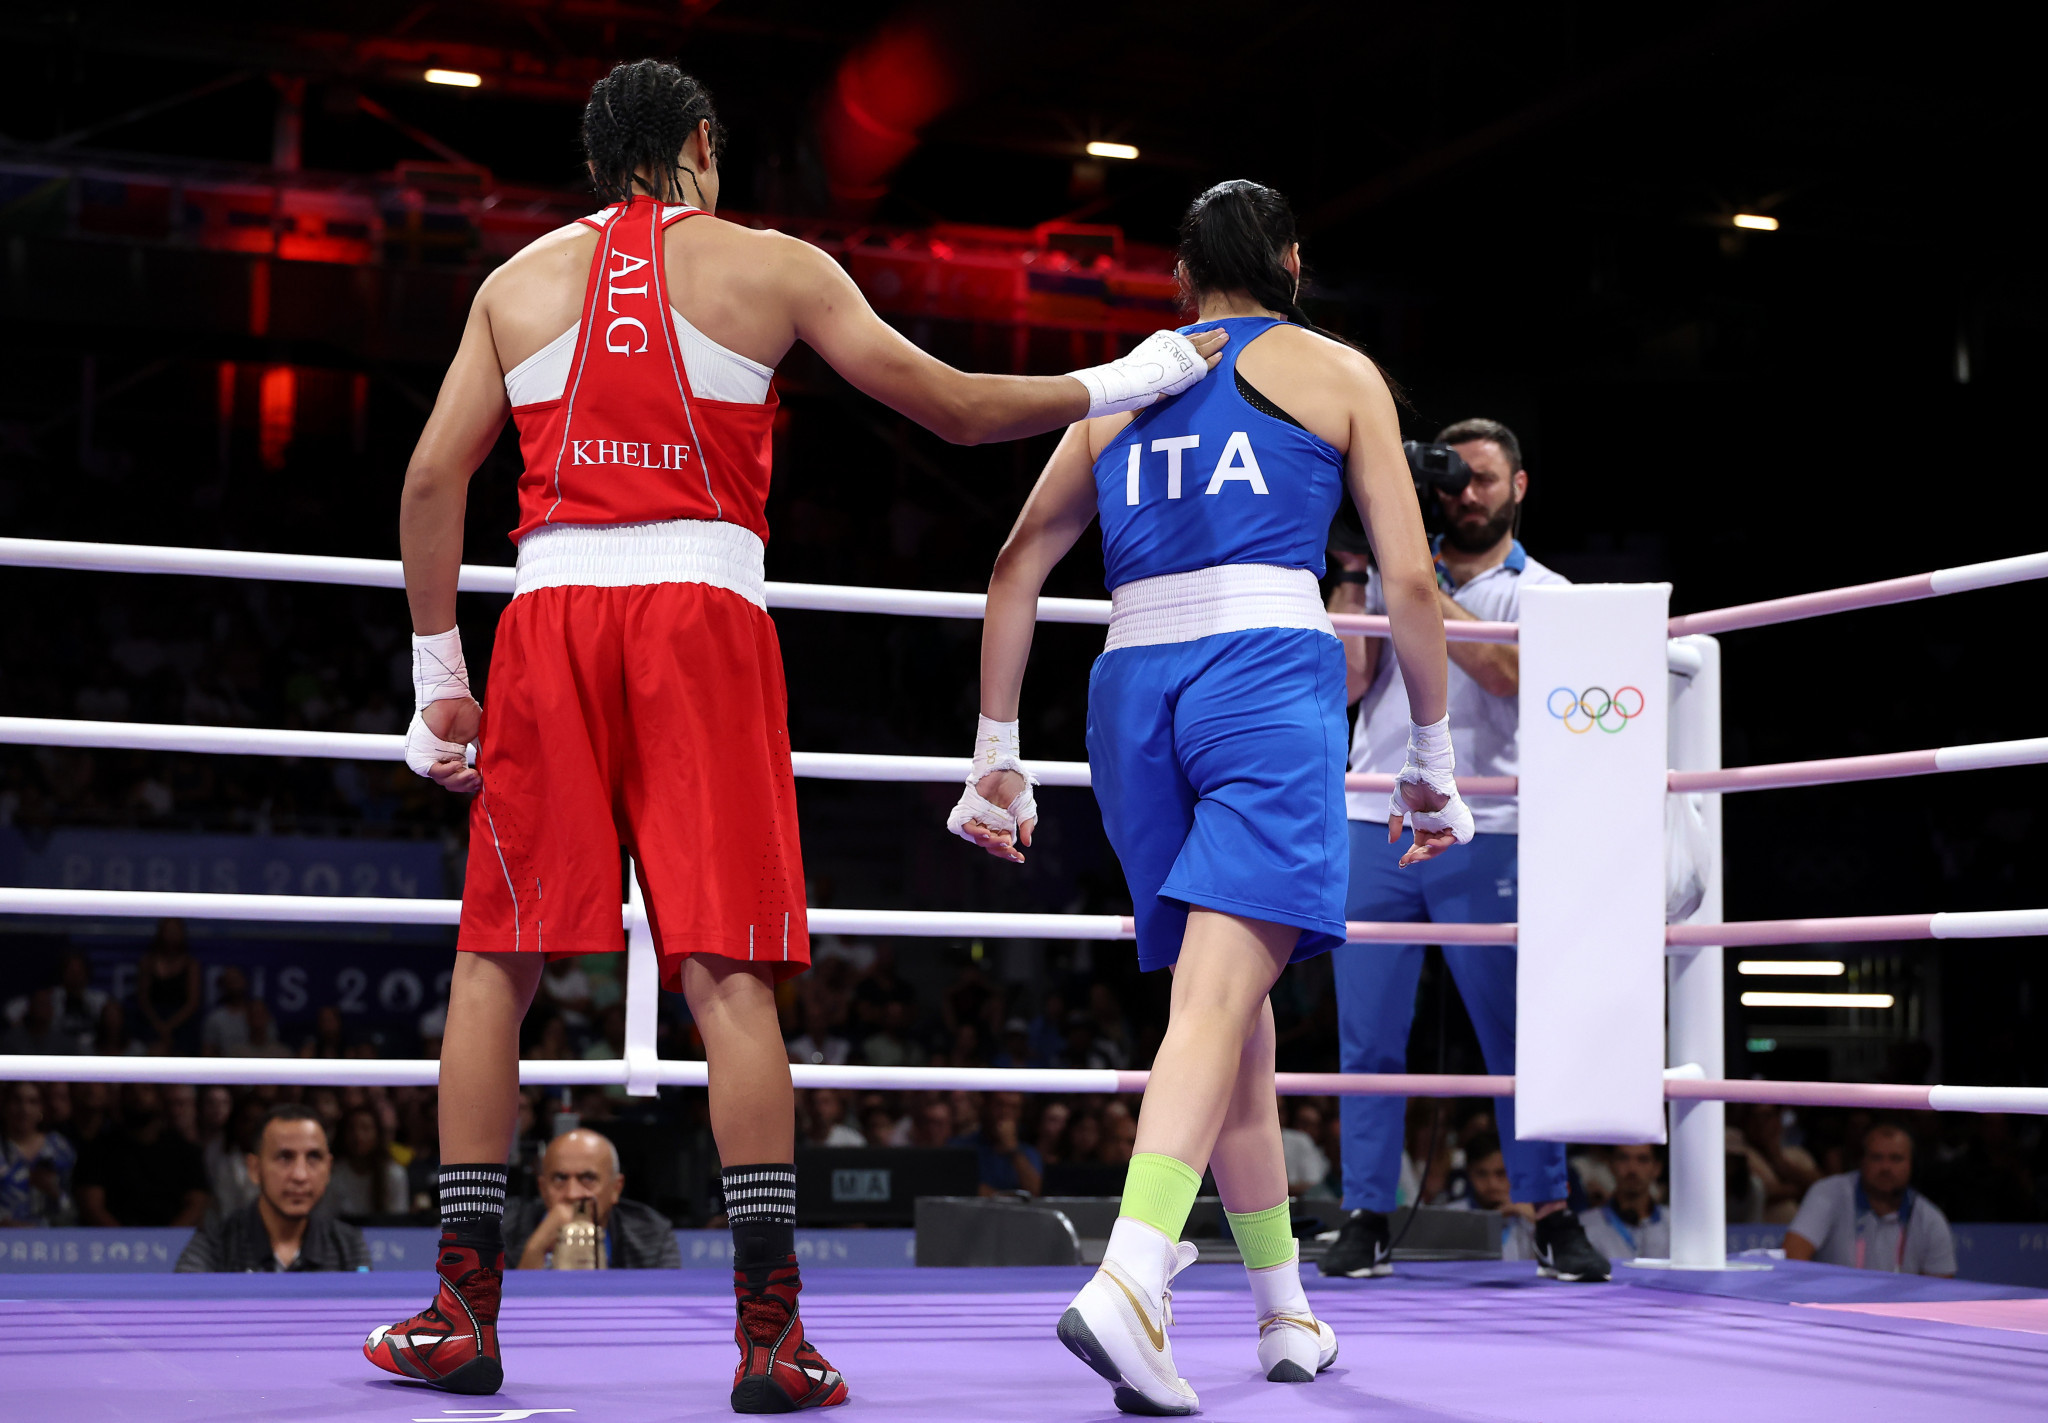 Imane Khelif of Team Algeria interacts with Angela Carini of Team Italy after Carini abandoned the Women's 66kg preliminary round match at the Paris 2024 Olympic Games. GETTY IMAGES